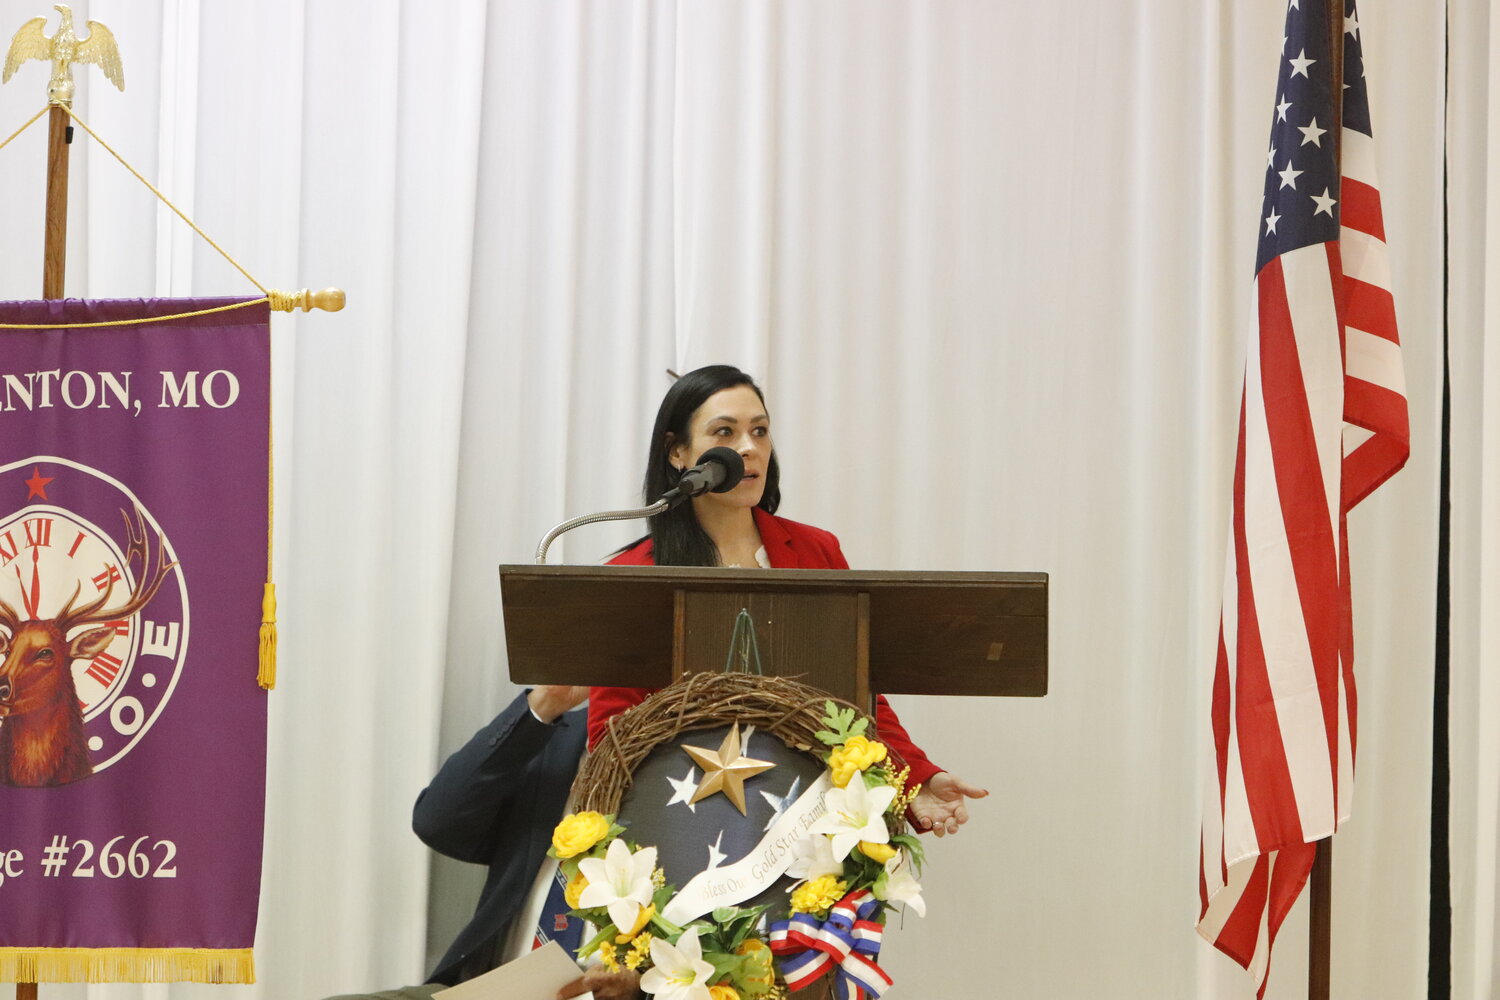 Rebecca Tallman speaks during the end of the Memorial Day Ceremony at Elks Lodge in Warrenton.